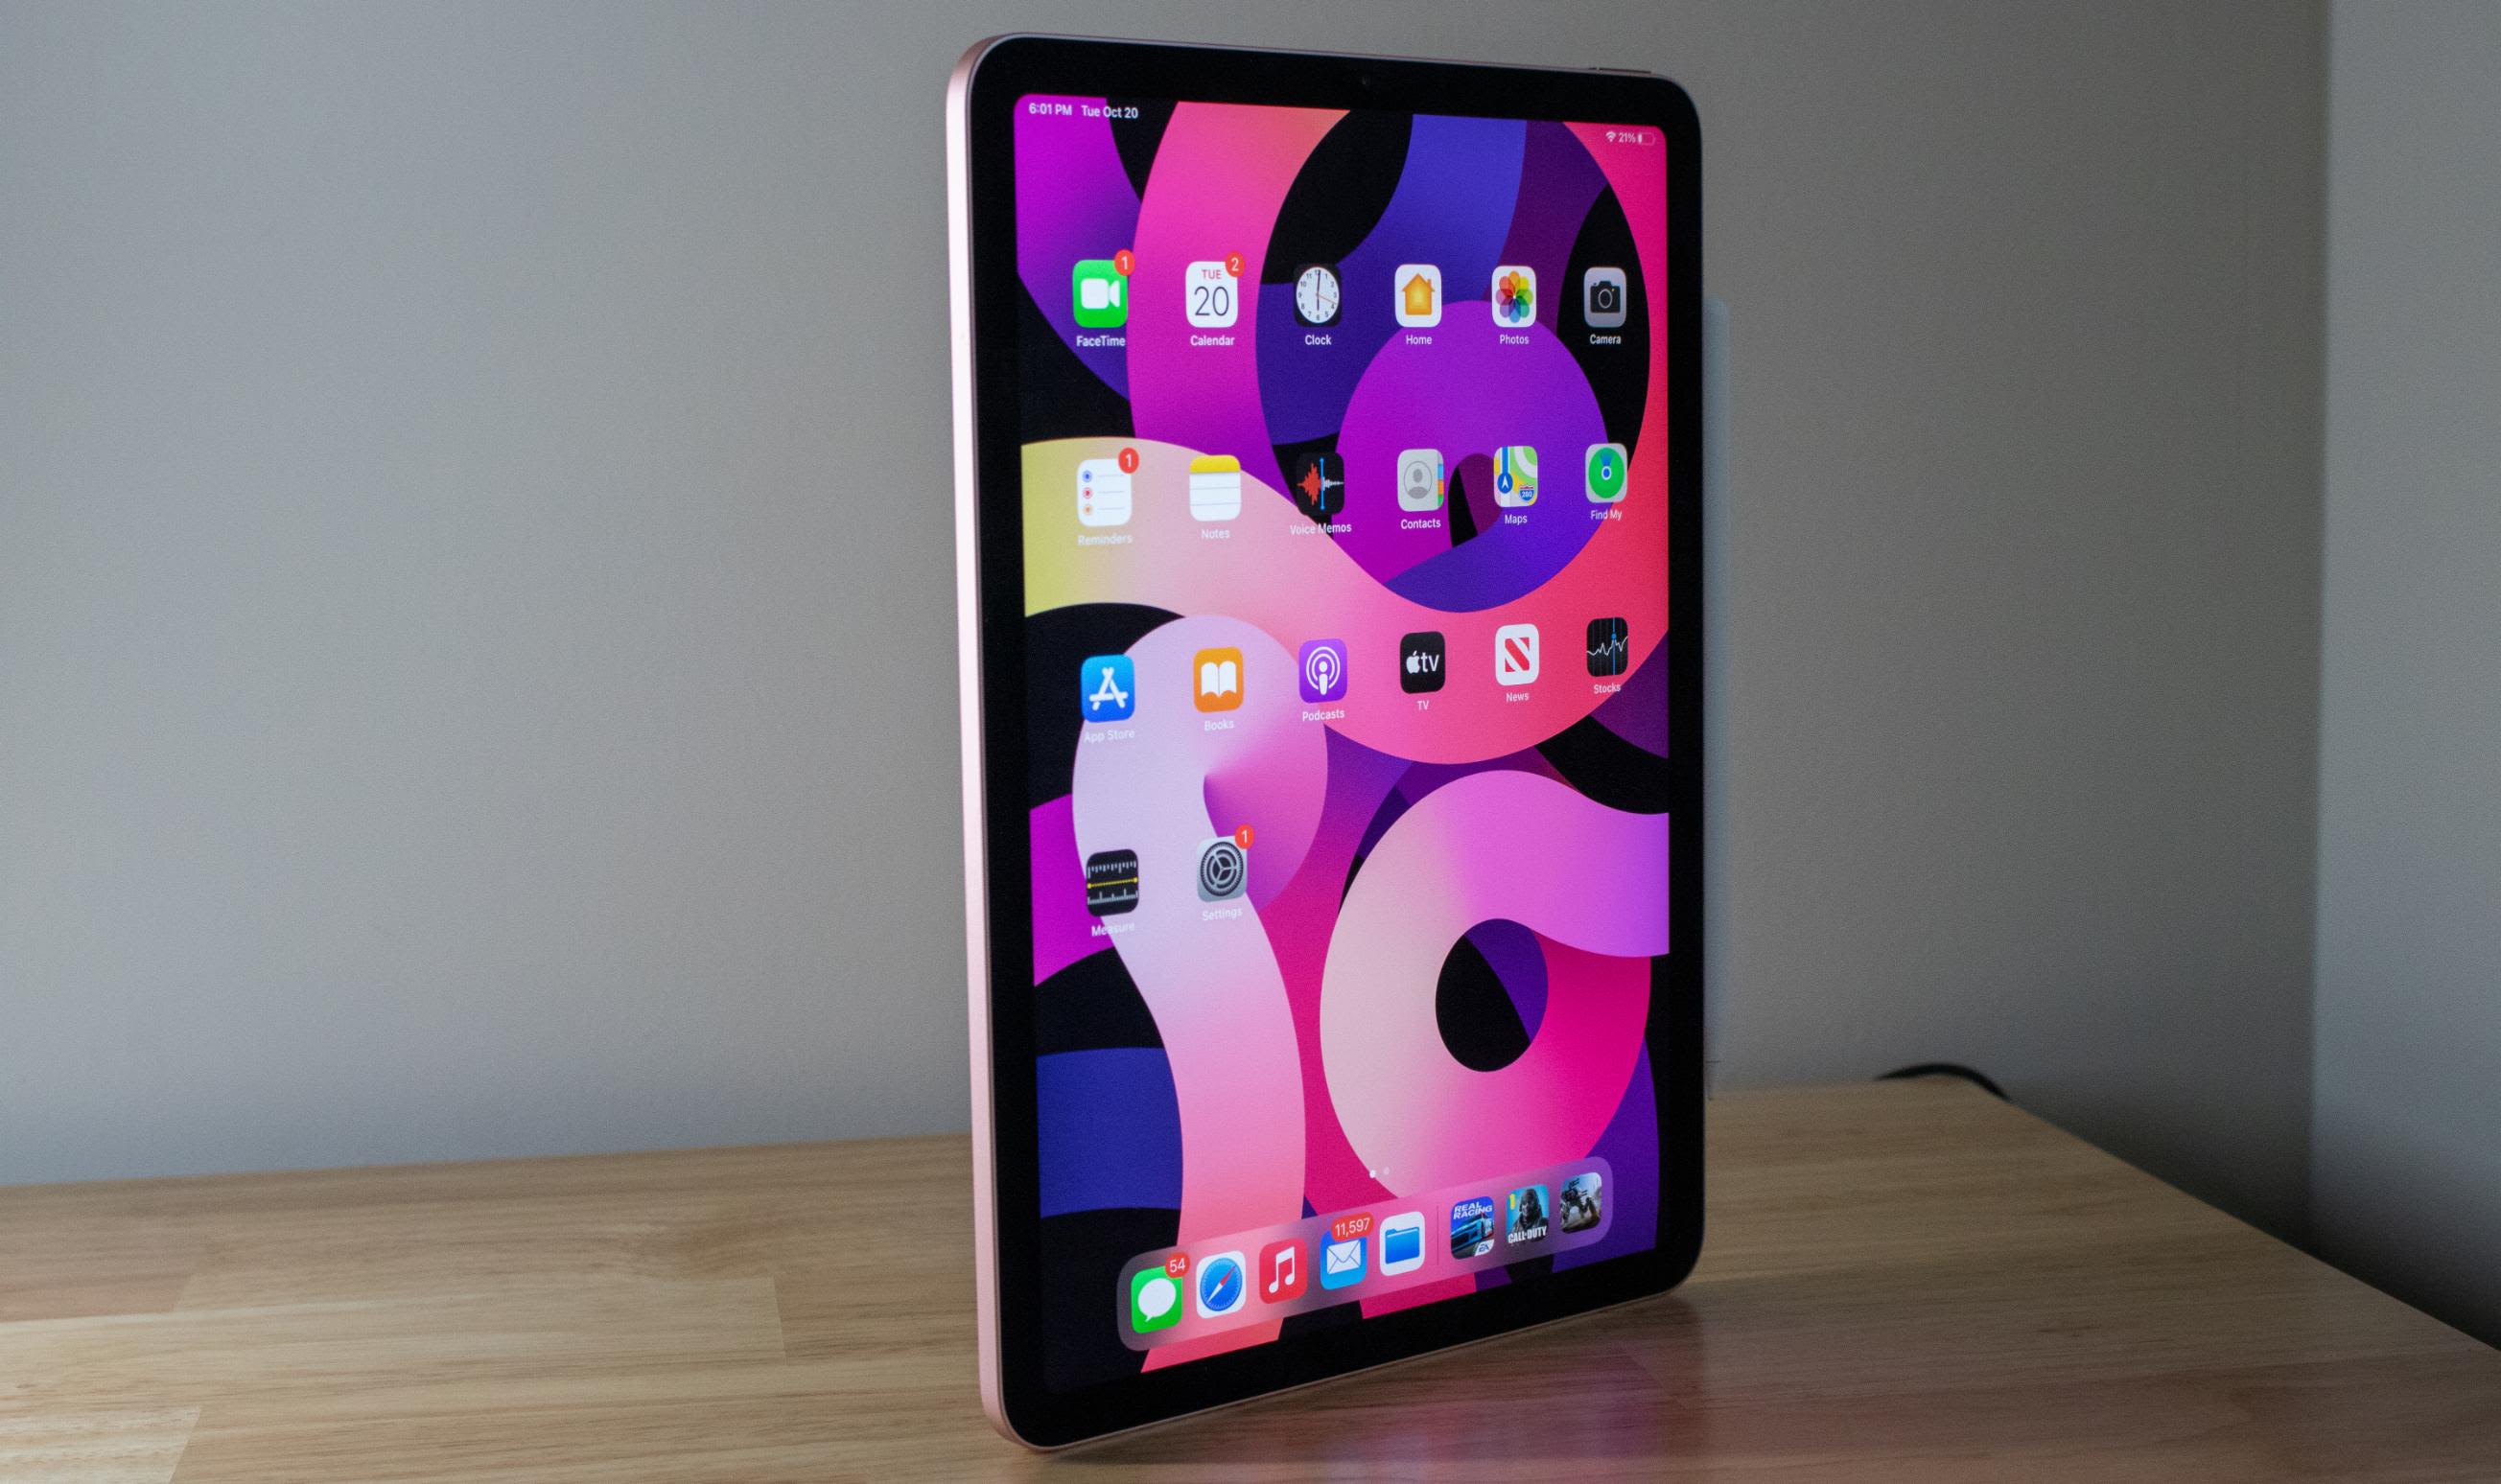 Apple iPad vs. iPad Pro: which tablet is right for you? - The Verge